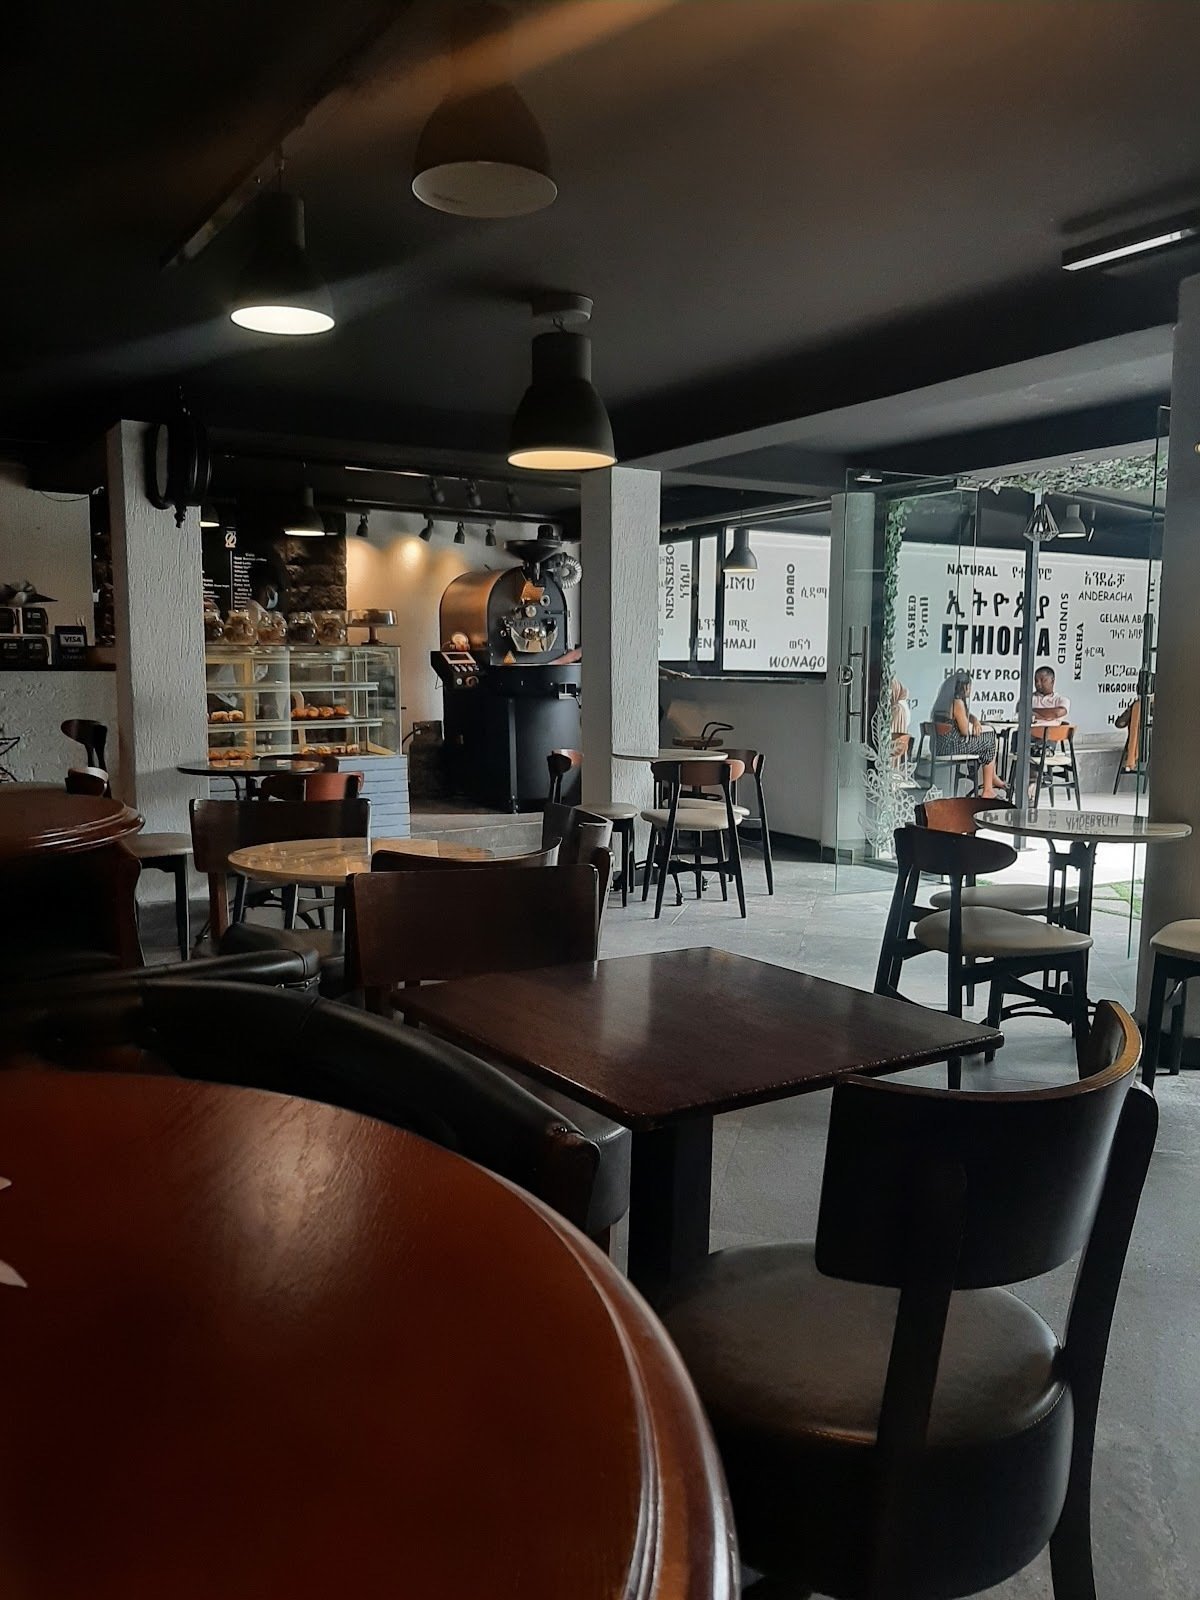 <span class="translation_missing" title="translation missing: en.meta.location_title, location_name: Zing Coffee Shop | Mekanisa, city: Addis Ababa">Location Title</span>